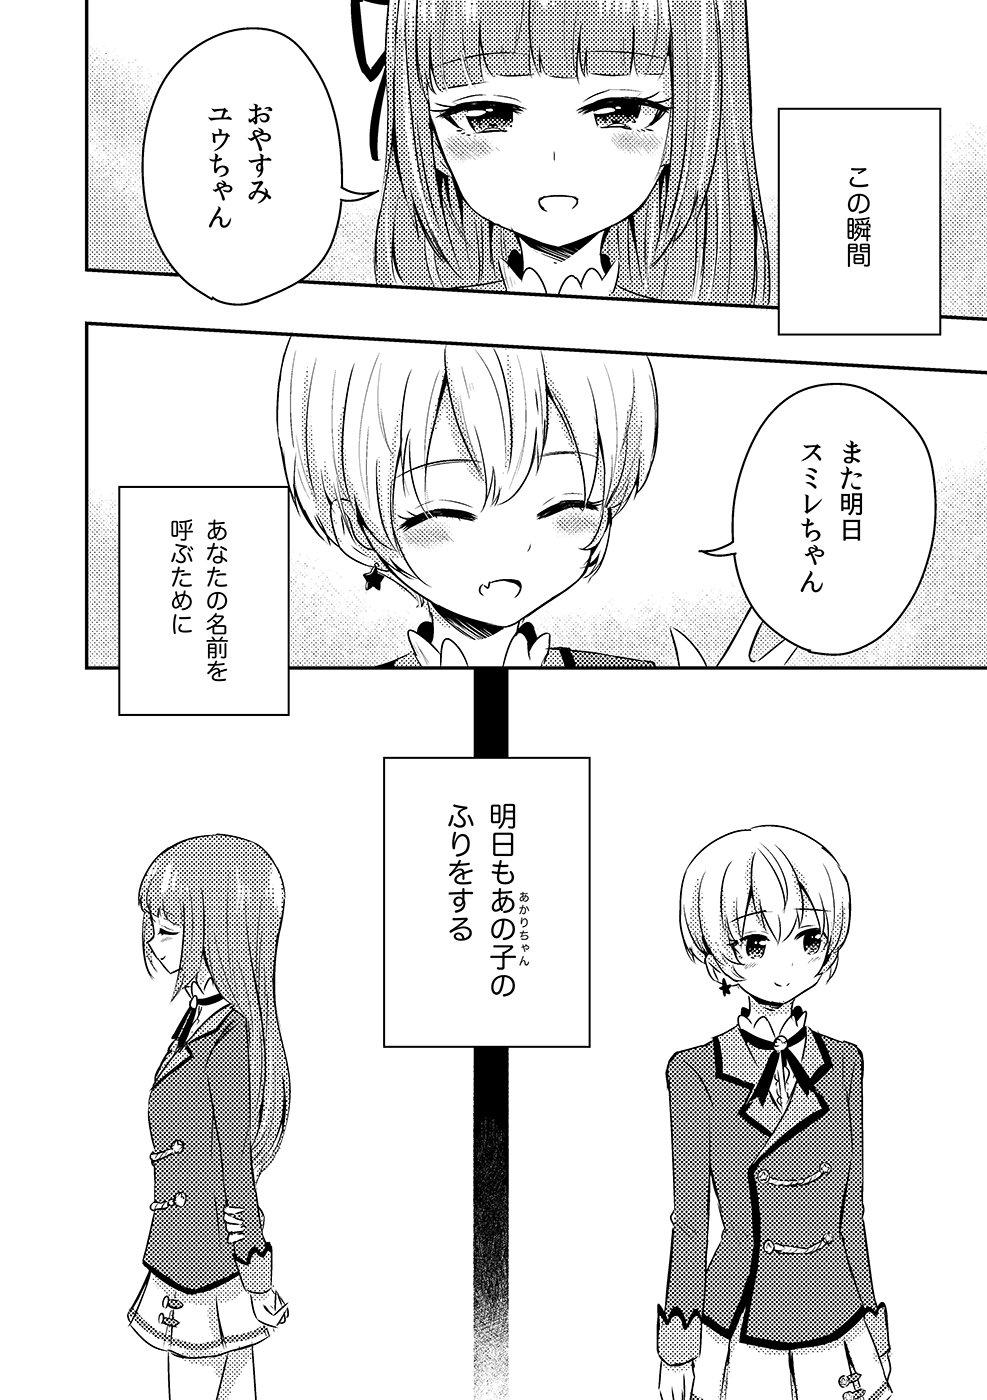 Large Who contributed to loveless sex joint two years ago! Yuusumi manga. - Aikatsu Whores - Page 6